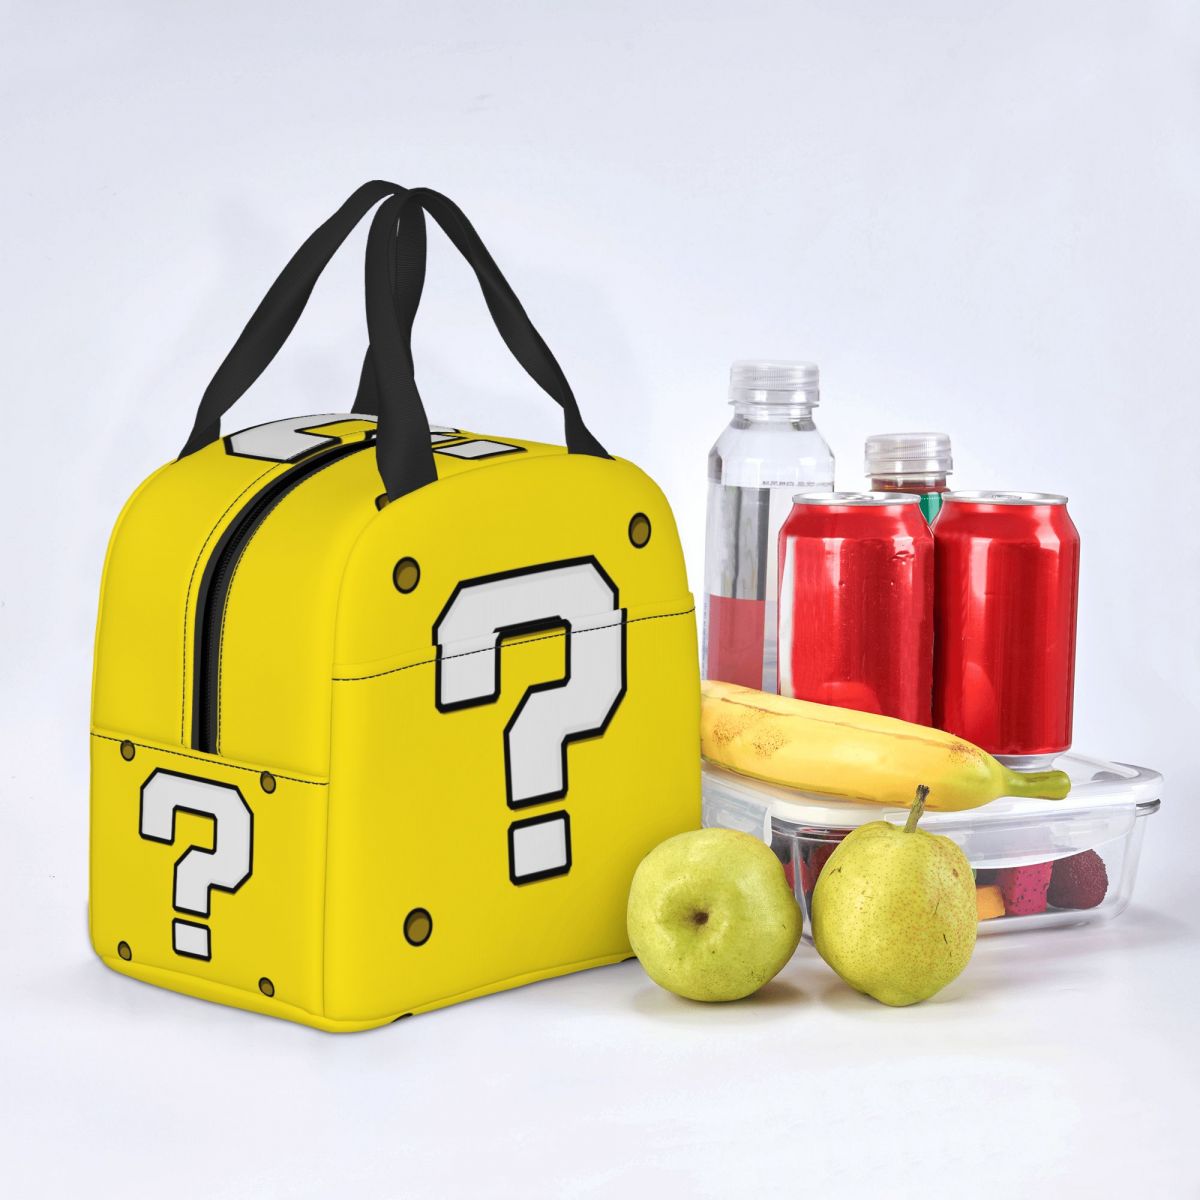 Trending Super Mario Bros Insulated Lunch Bag Leakproof Hot Cold Lunch Box  - Appleverse